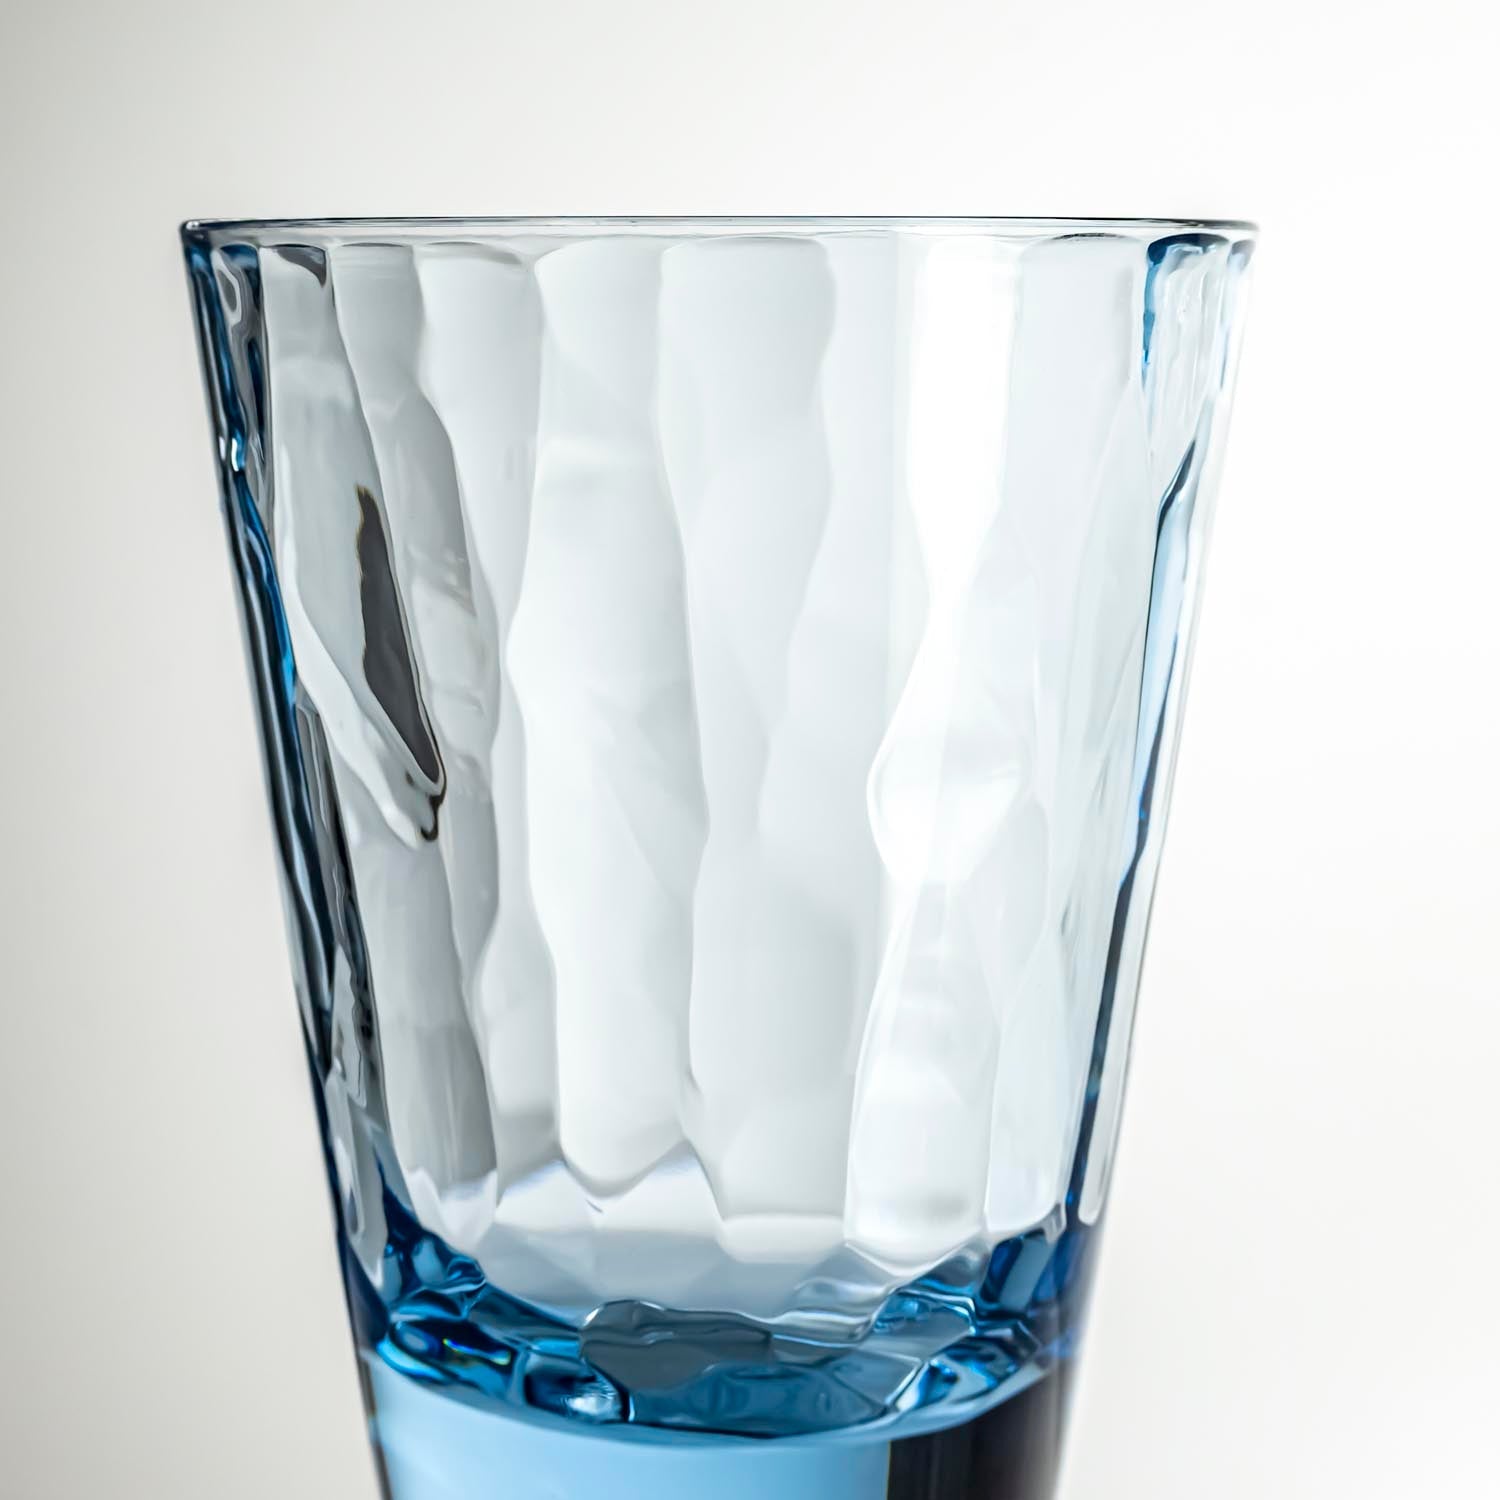 4-ounce blue acrylic tumbler glass from the Merritt Designs Cascade collection. Detailed view on white background